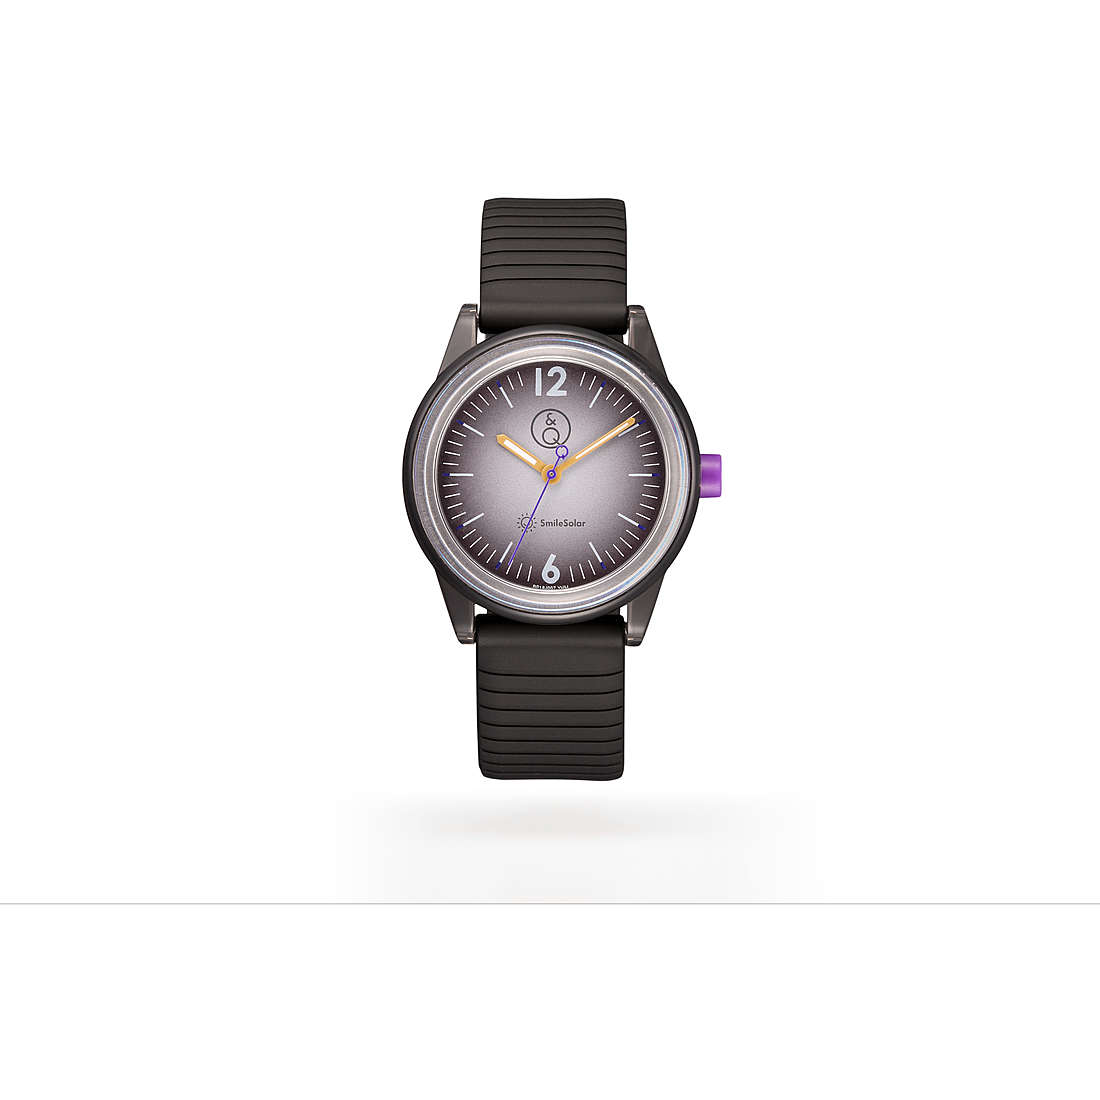 Smile Solar Music Festival Women’s Time-Only Watch